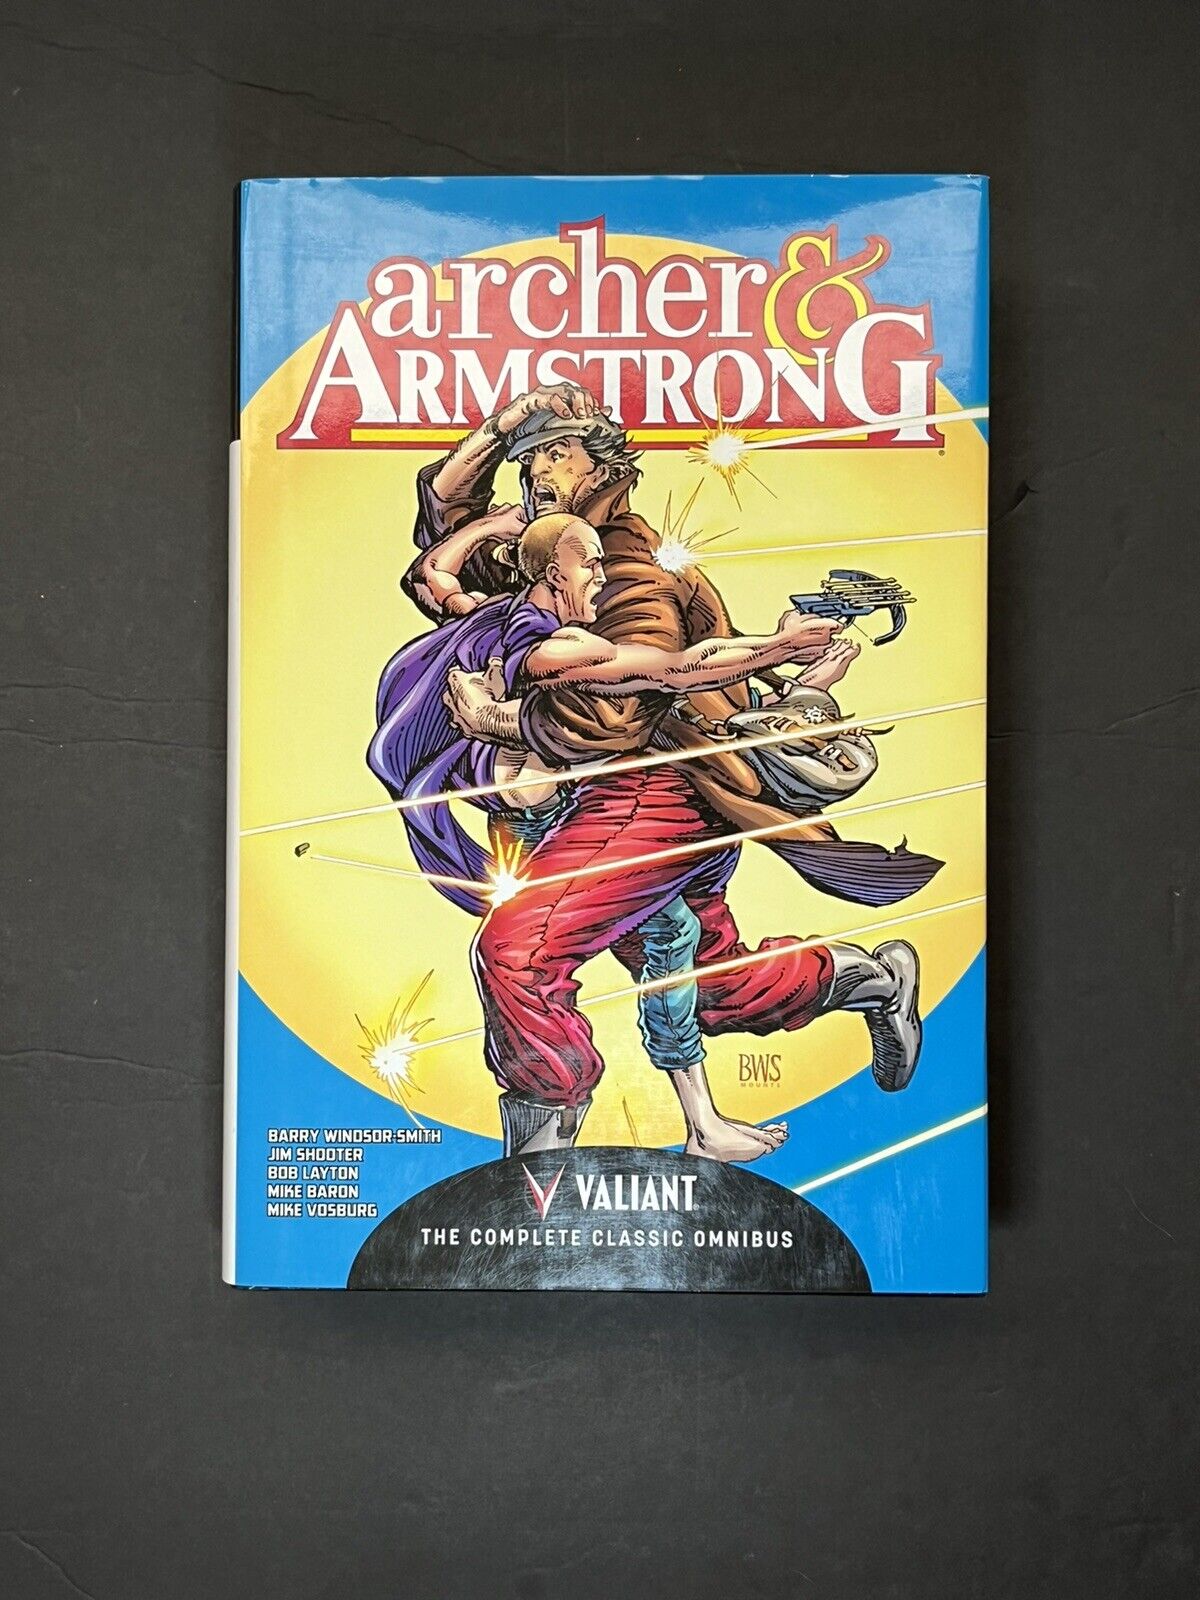 ARCHER & ARMSTRONG OMNIBUS Complete Valiant Comics Series by Barry Windsor-Smith